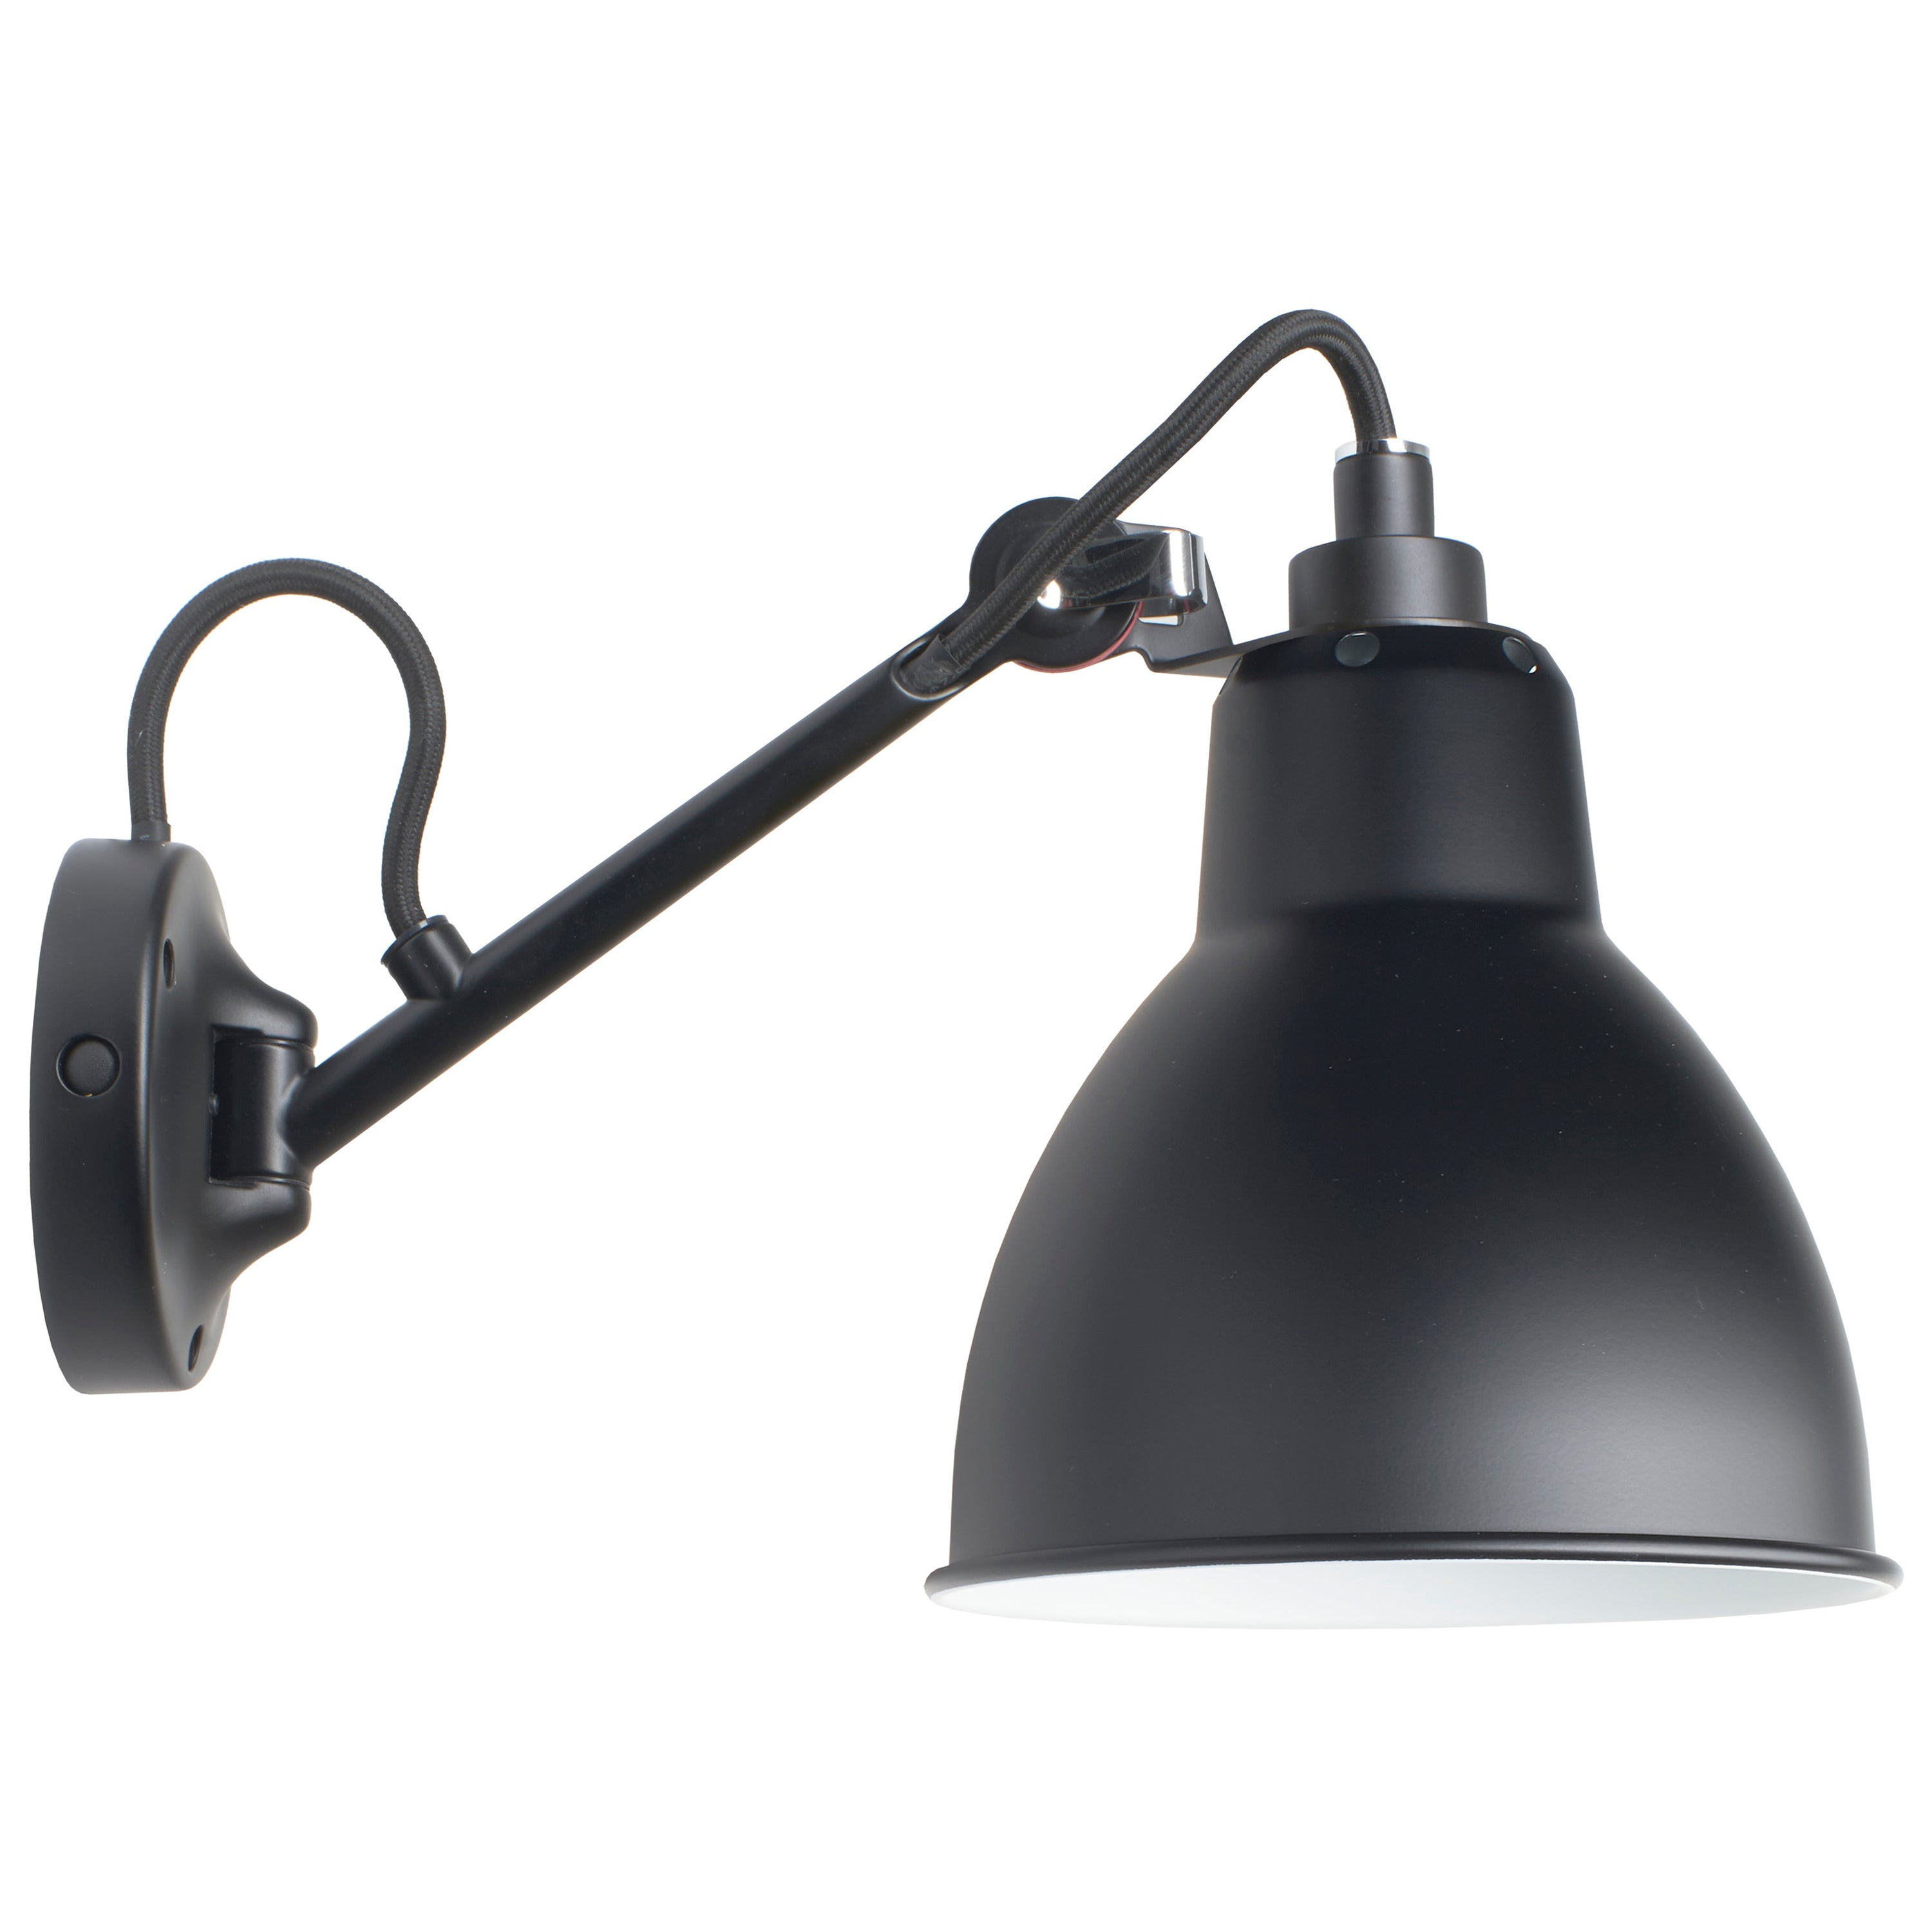 DCW Editions La Lampe Gras N°104 Wall Lamp in Black Arm and Black Shade For Sale